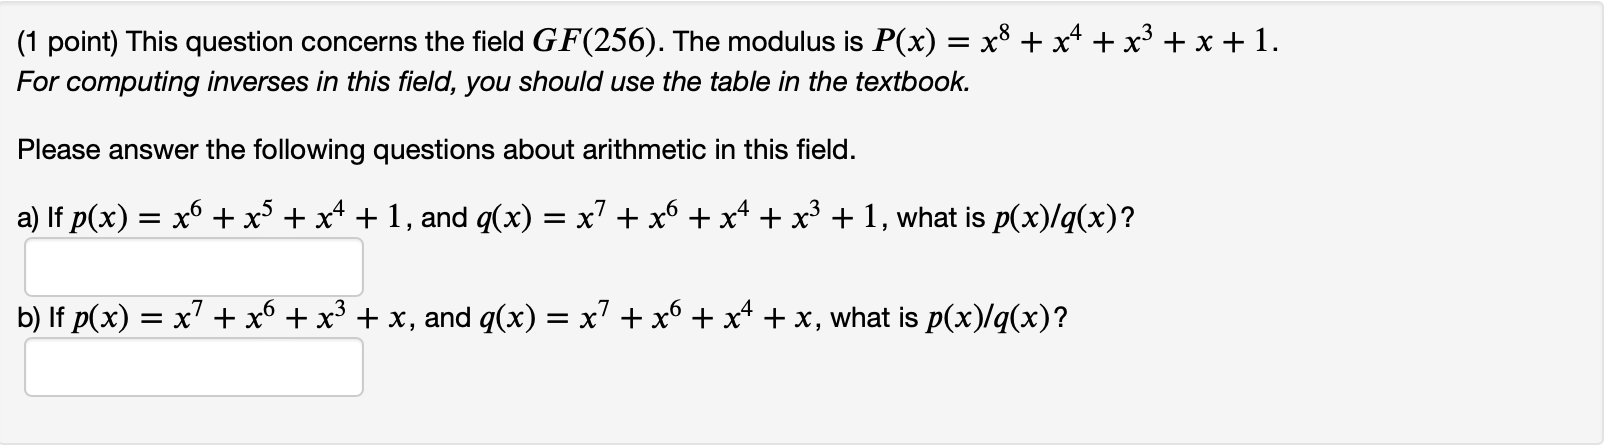 (1 point) This question concerns the field GF(256). The modulus is P(x) = x + x + x + x + 1. For computing